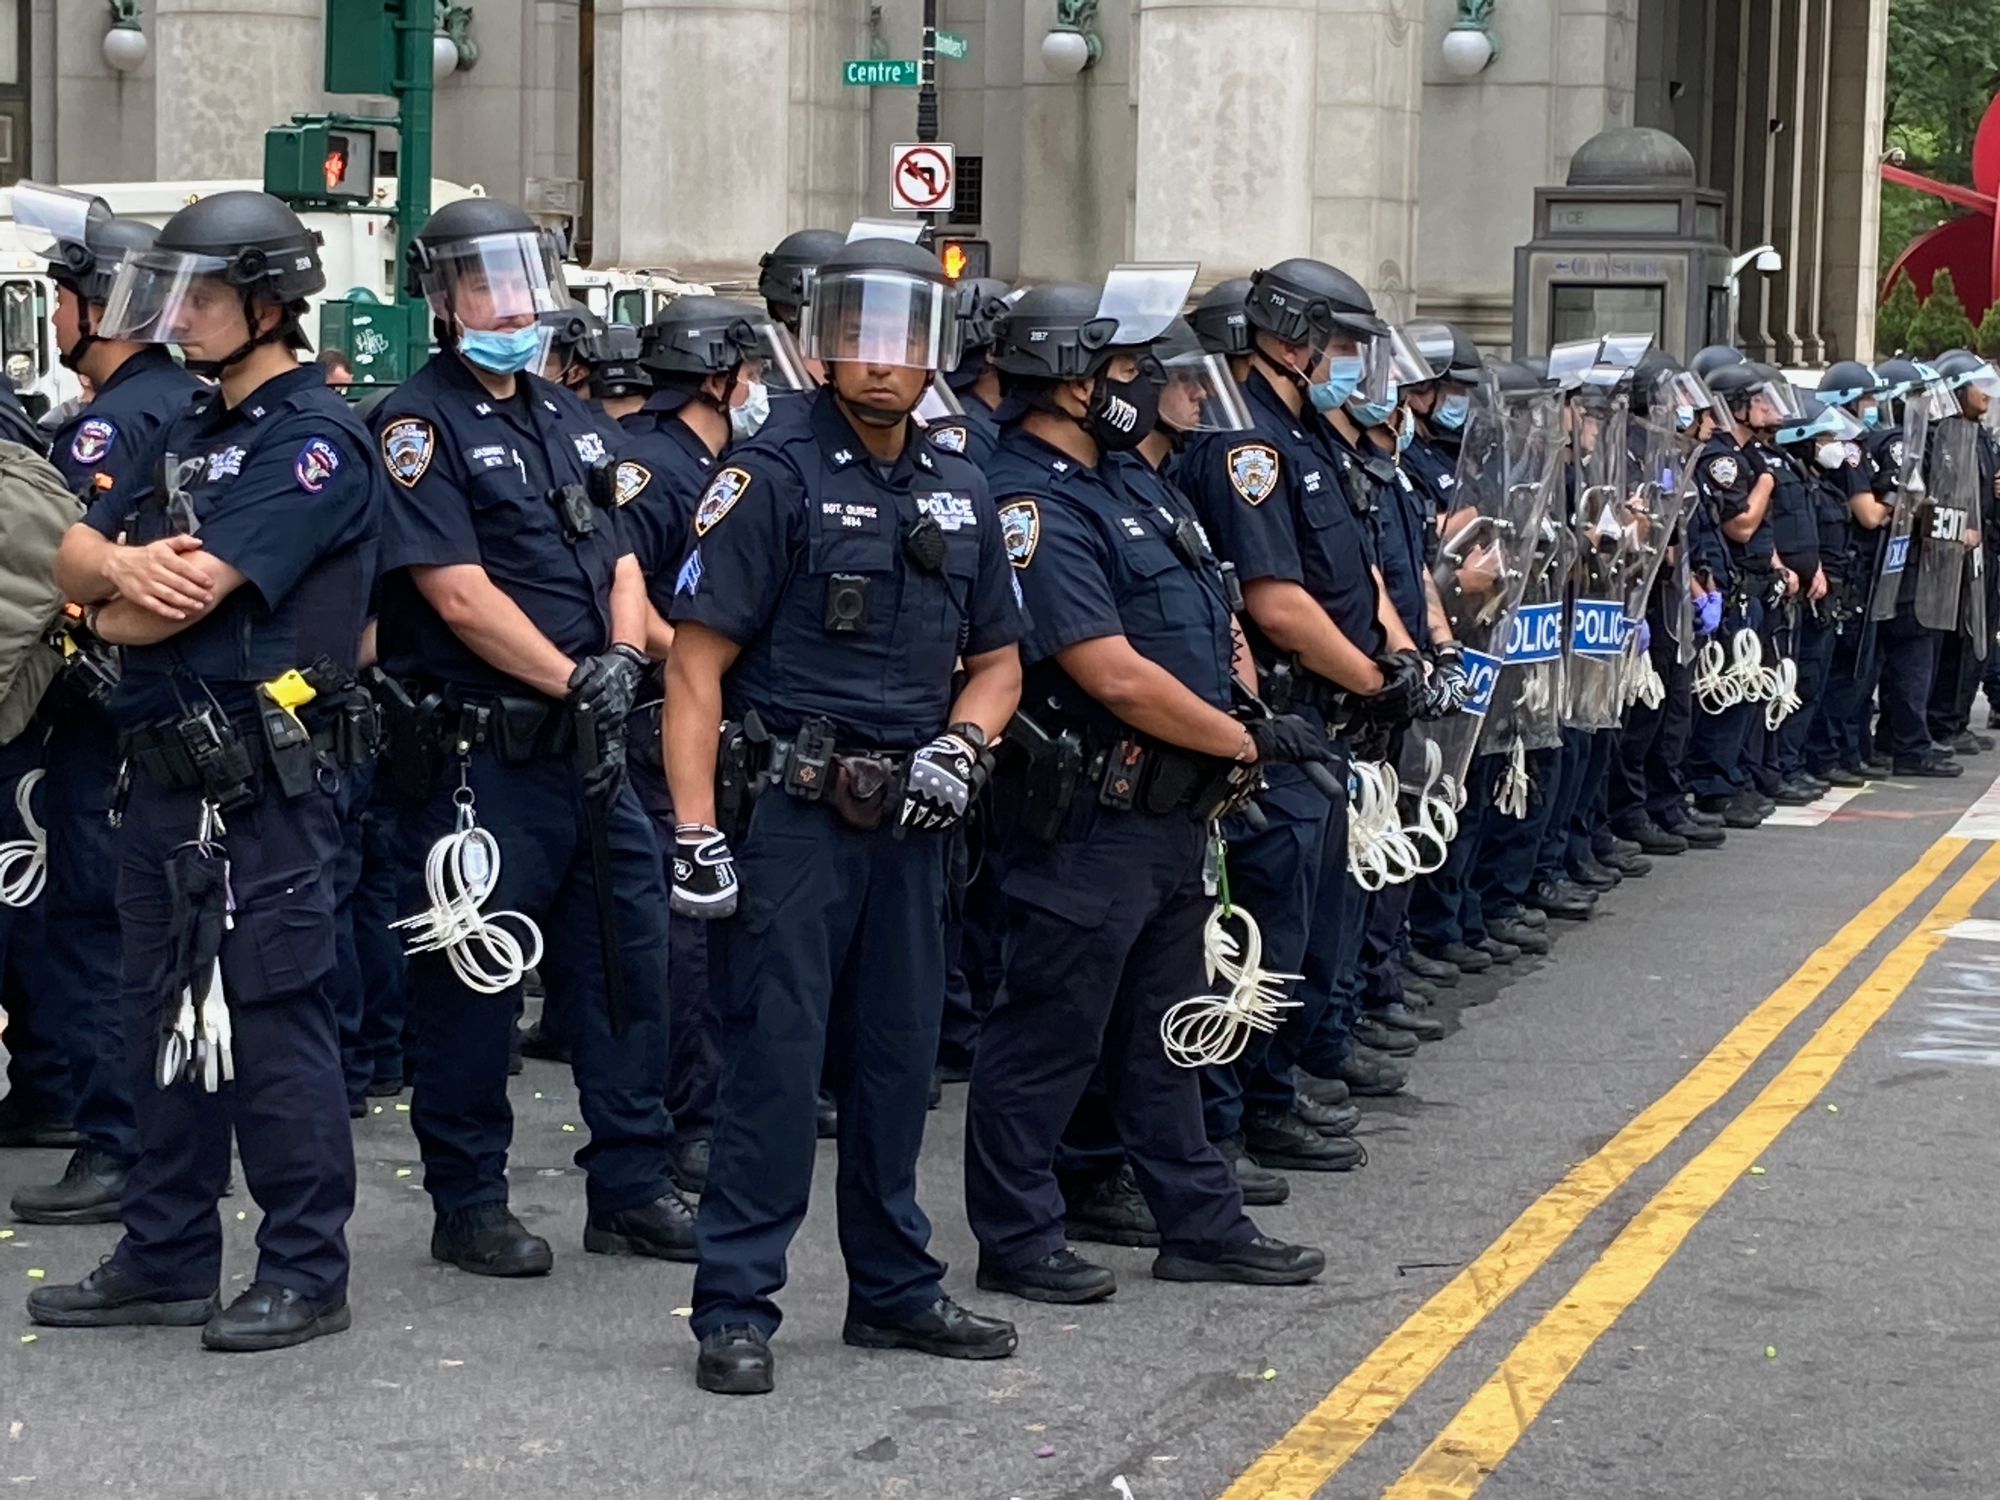 Police officers in riot gear lined up along a street in Lower Manhattan.